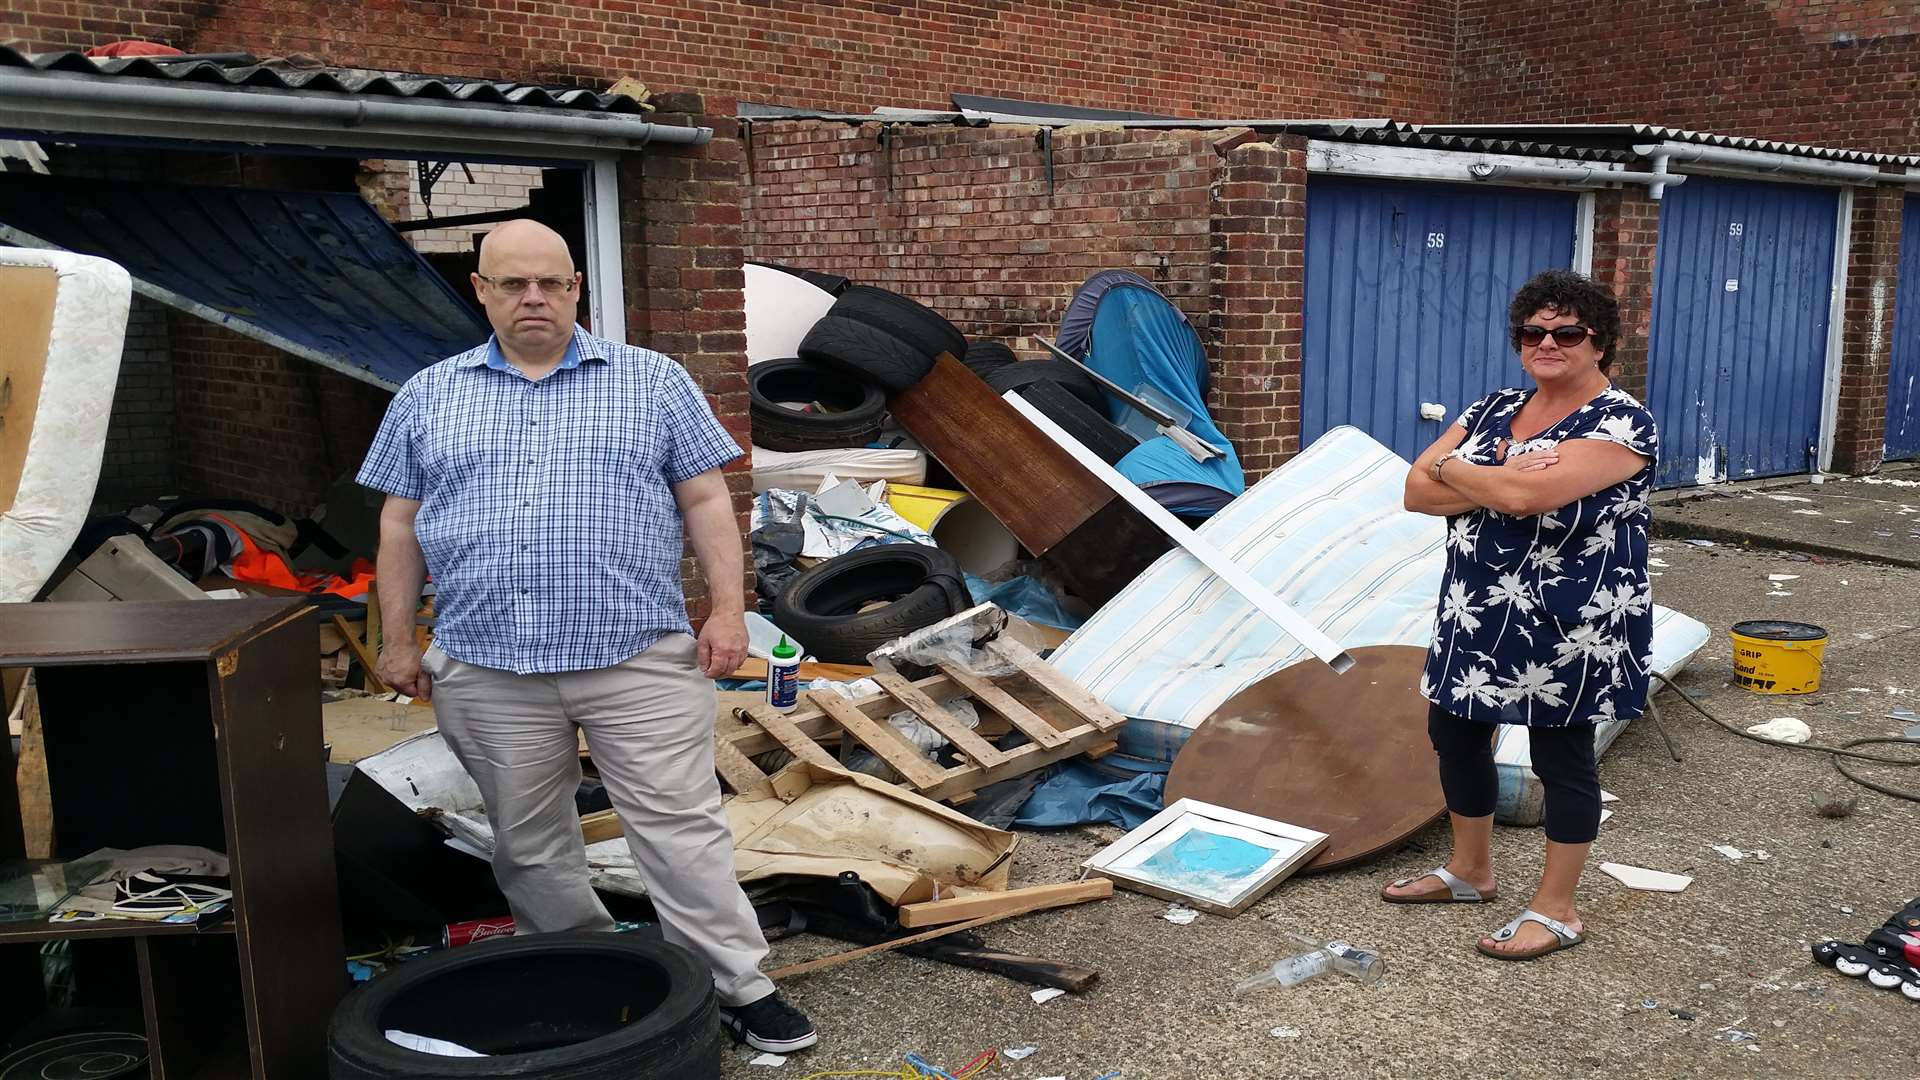 Rochester East ward Cllrs Nick Bowler and Teresa Murray are not happy about the mess.